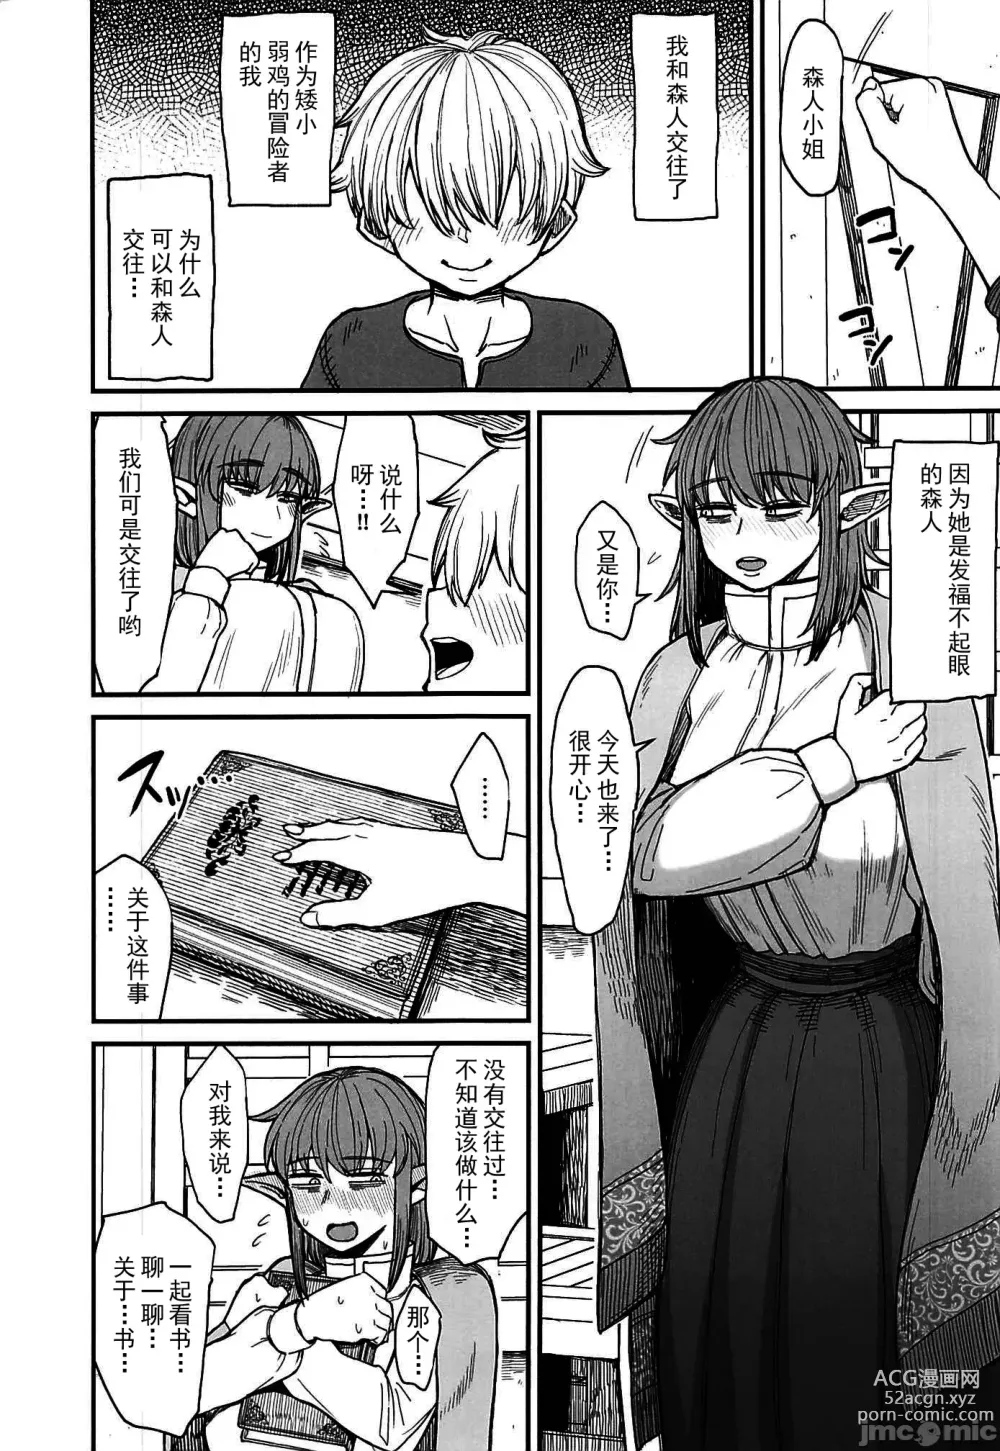 Page 3 of doujinshi 异世界的女人们6.0